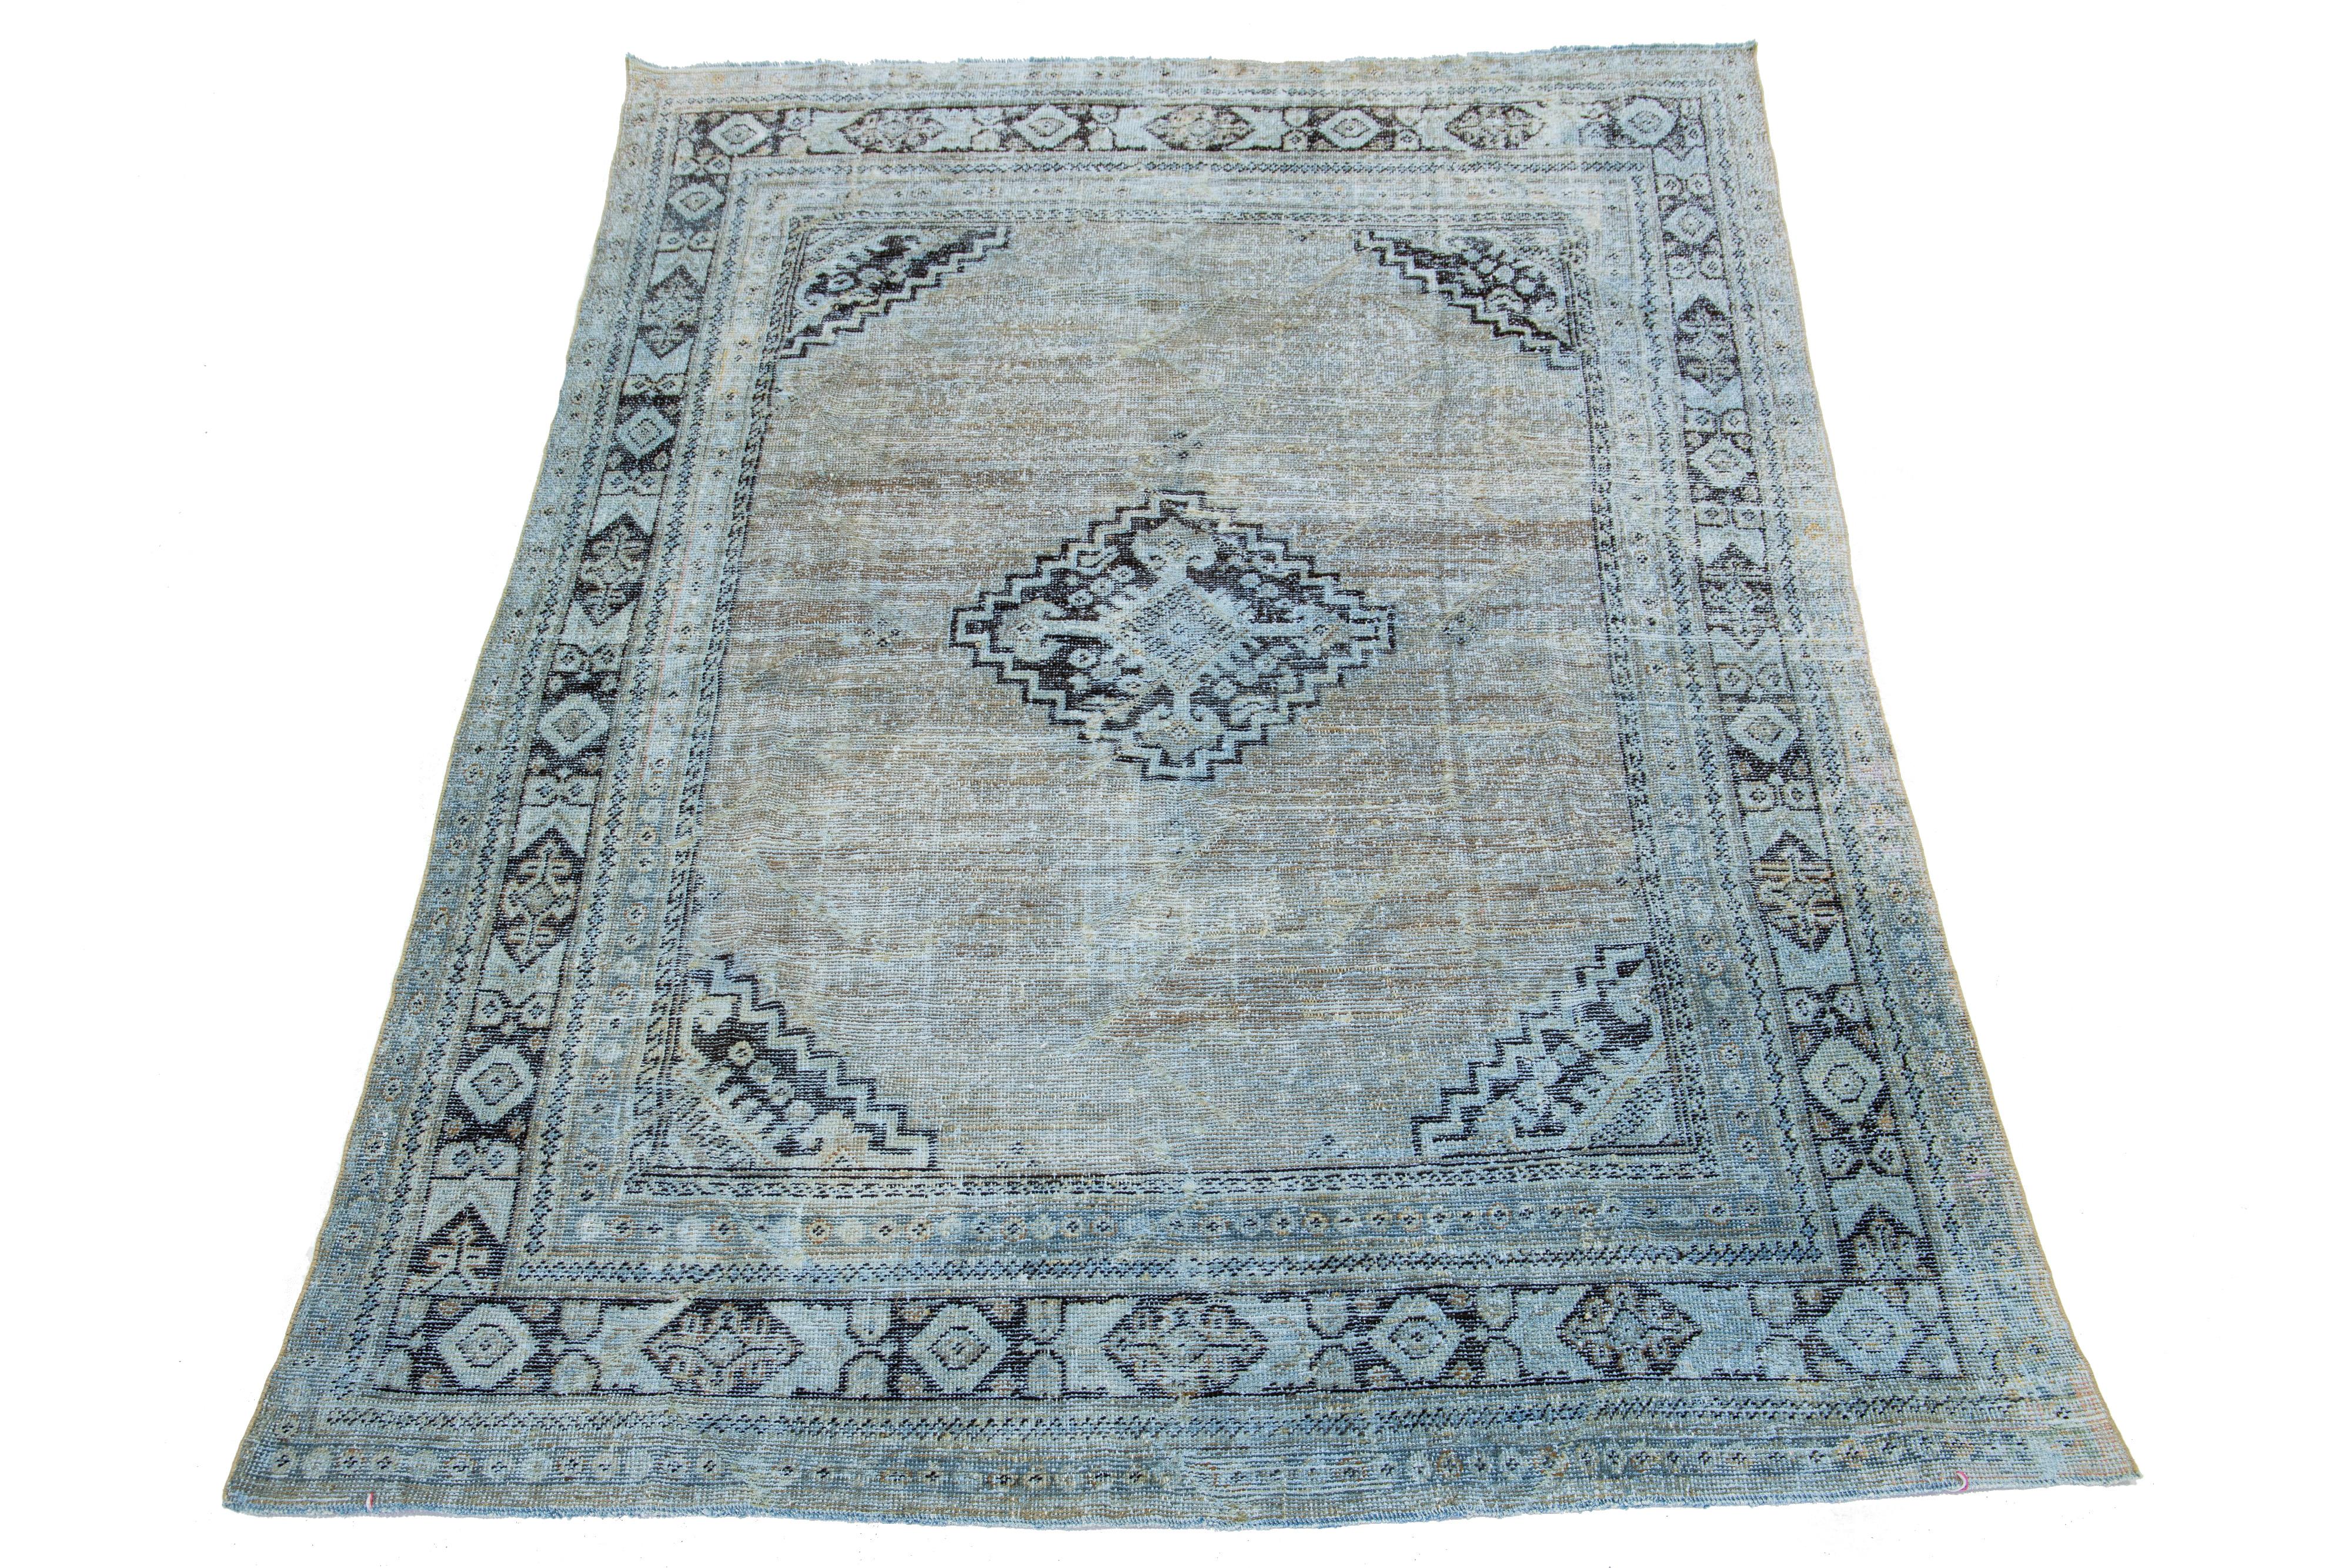 This antique wool rug from the 1920s showcases expert hand-knotted quality and boasts a medallion floral design. The primary color scheme of this rug is composed of brown tones with complementary hues of blue, resulting in a classic and timeless